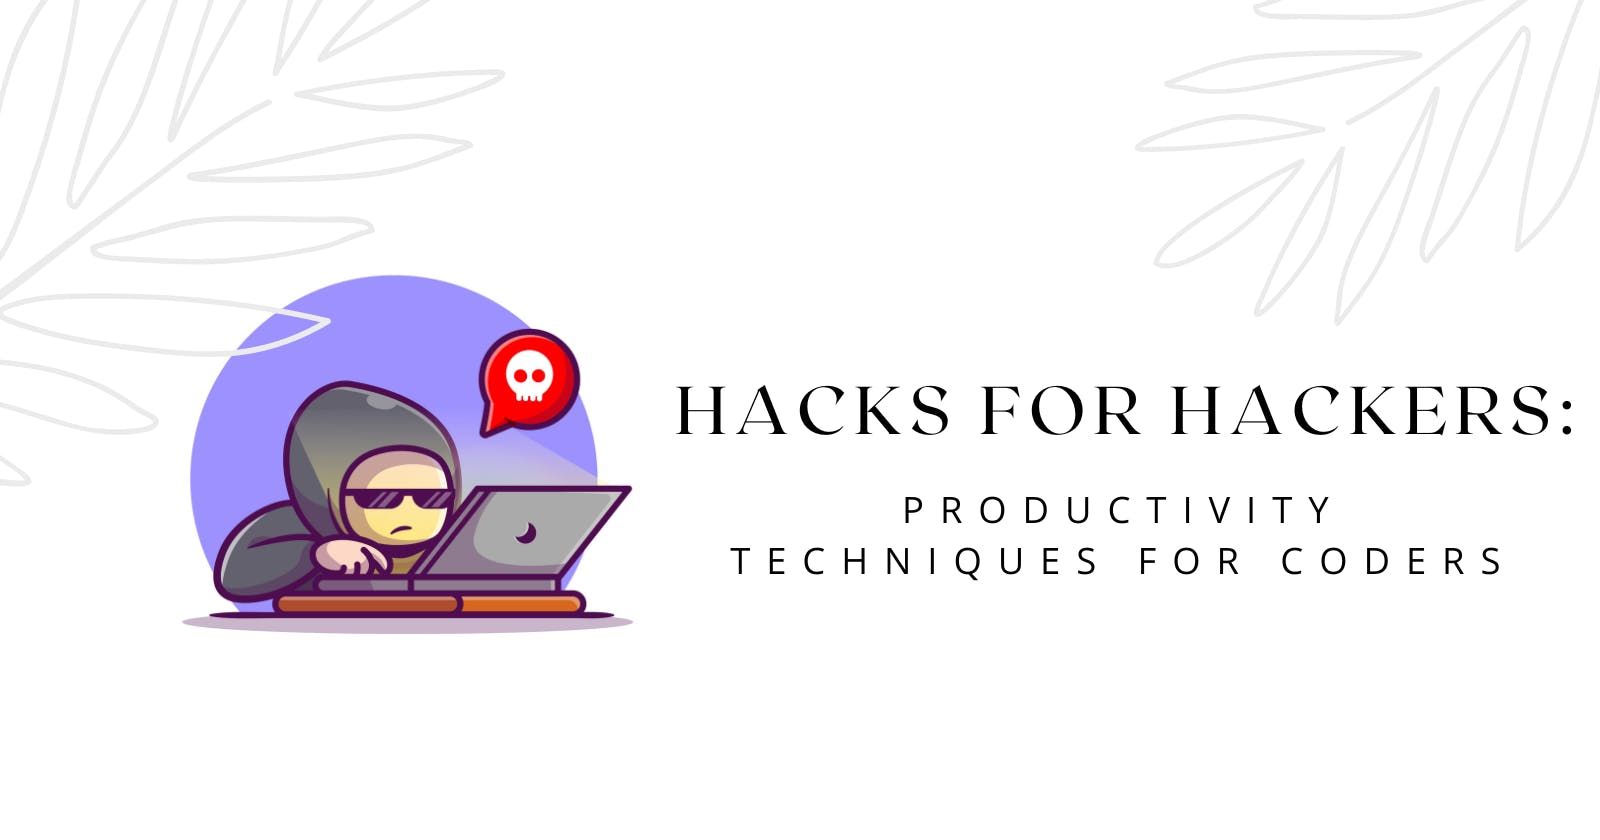 Hacks for Hackers: Productivity Techniques for Coders